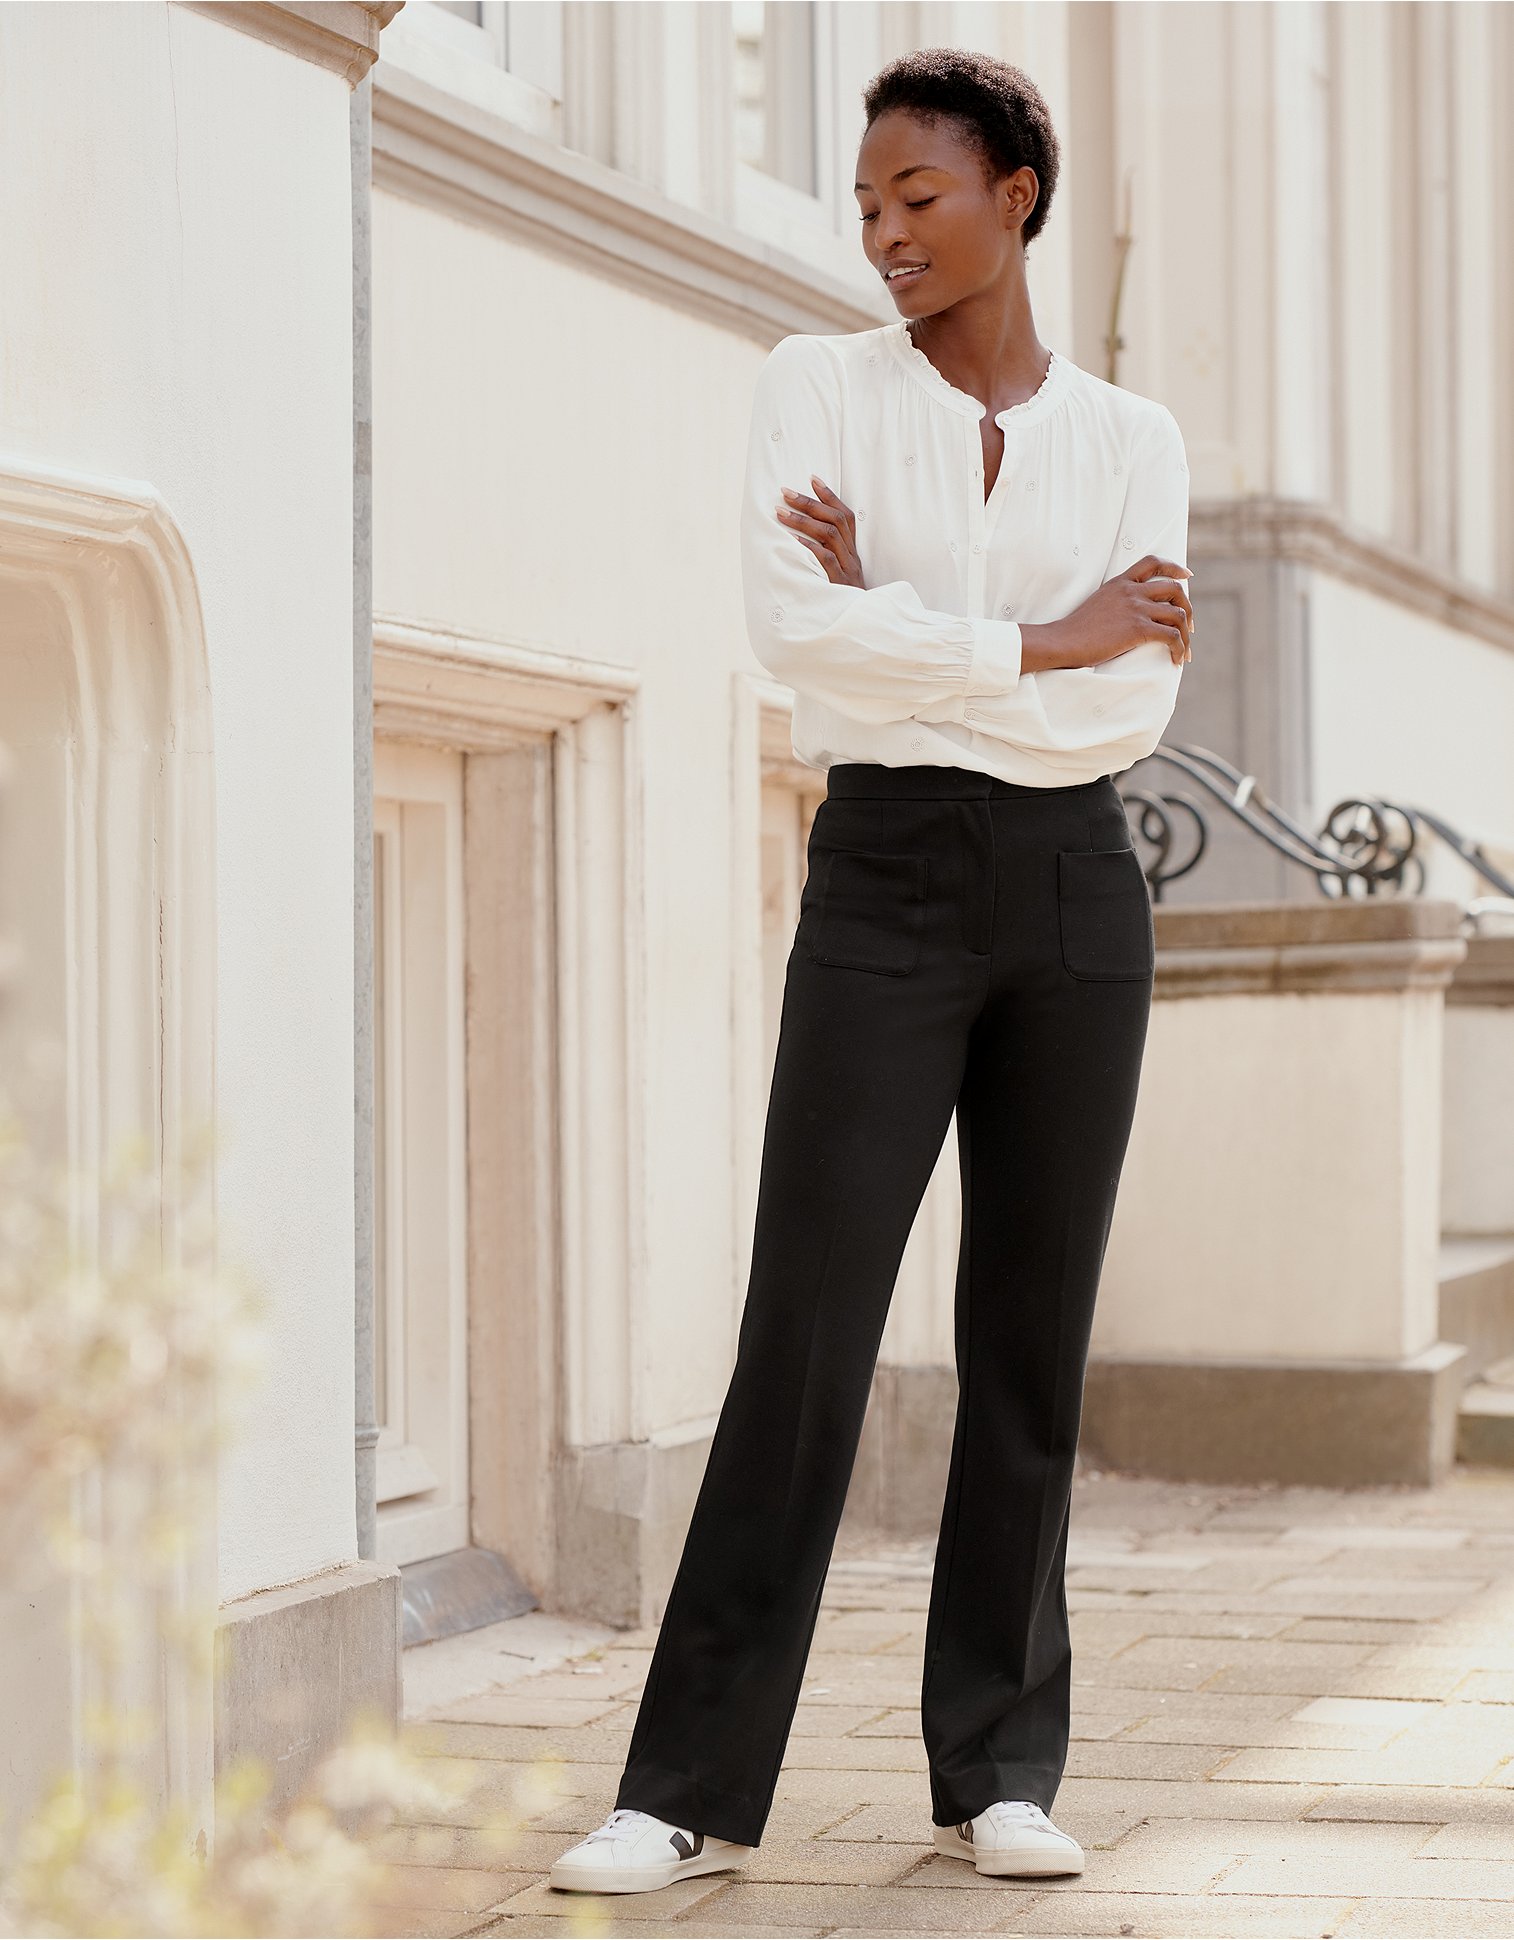 The White Company Women Clothing Pants Stretch Pants Stretch-Jersey Pocket-Detail Trousers 4 